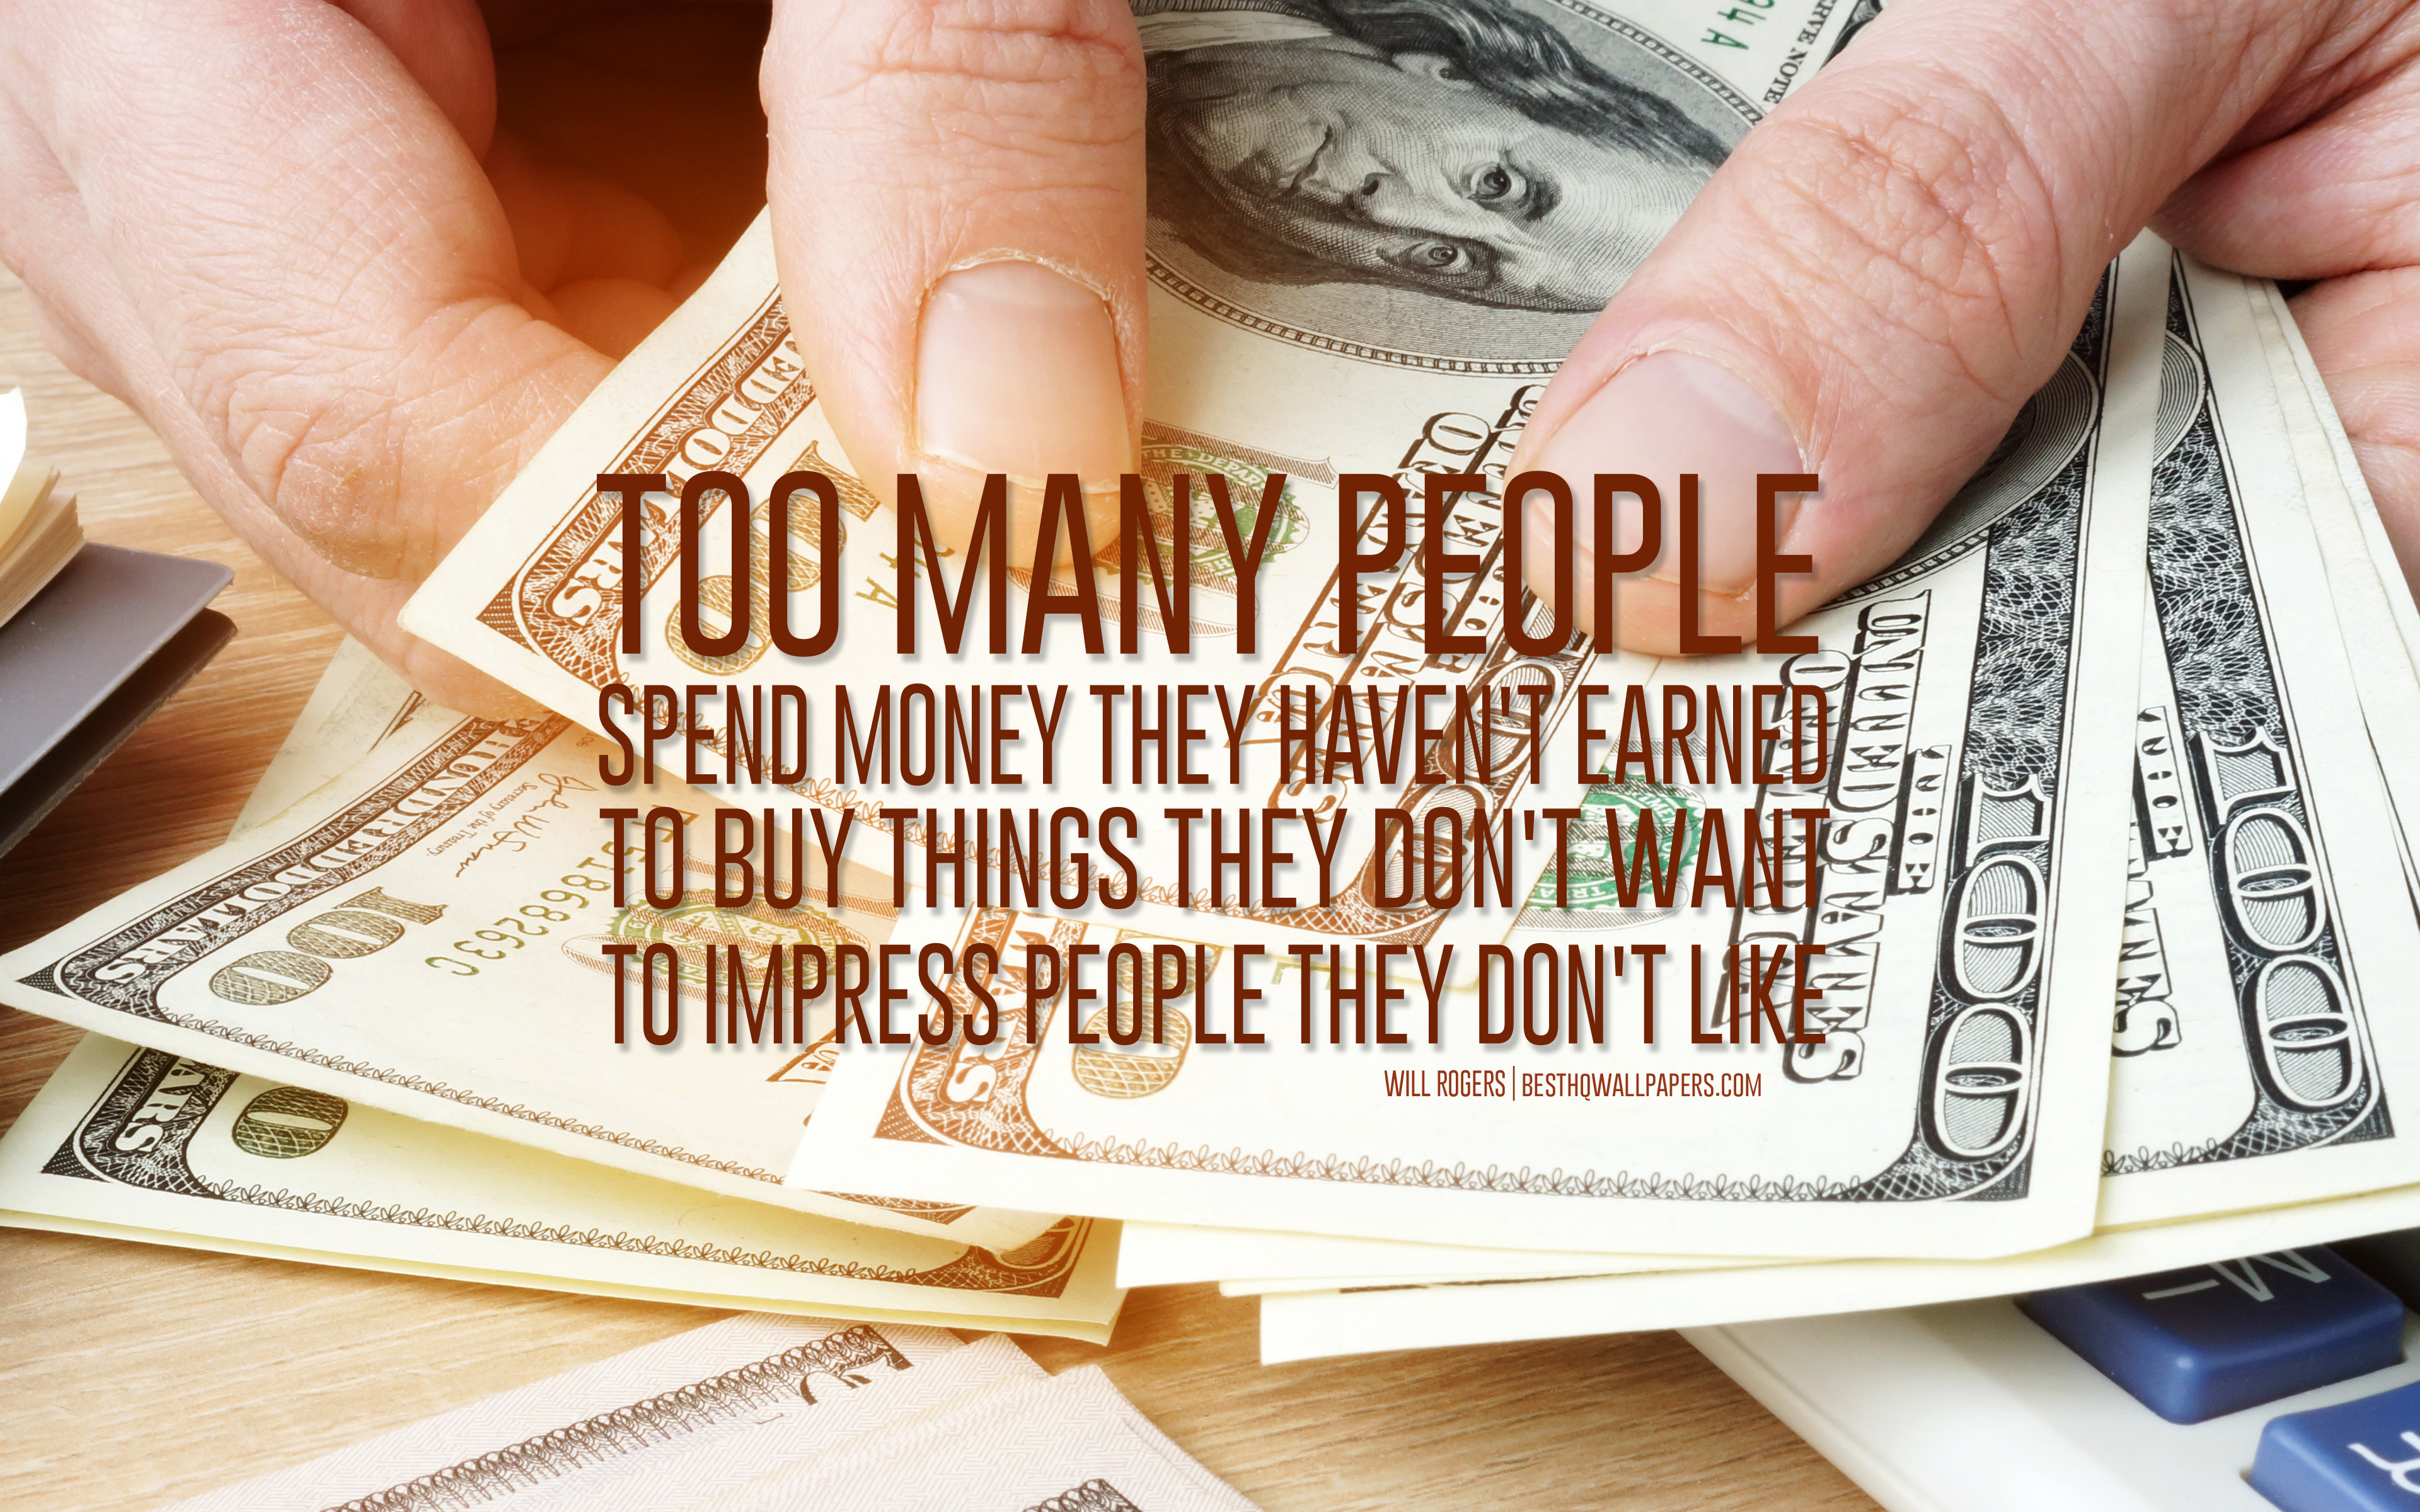 Too much money. Quotations about money. Desktop Wallpapers money quotes. Too many people spend money they earned..to buy things they don't want..to Impress people that they don't like.. I like spend money